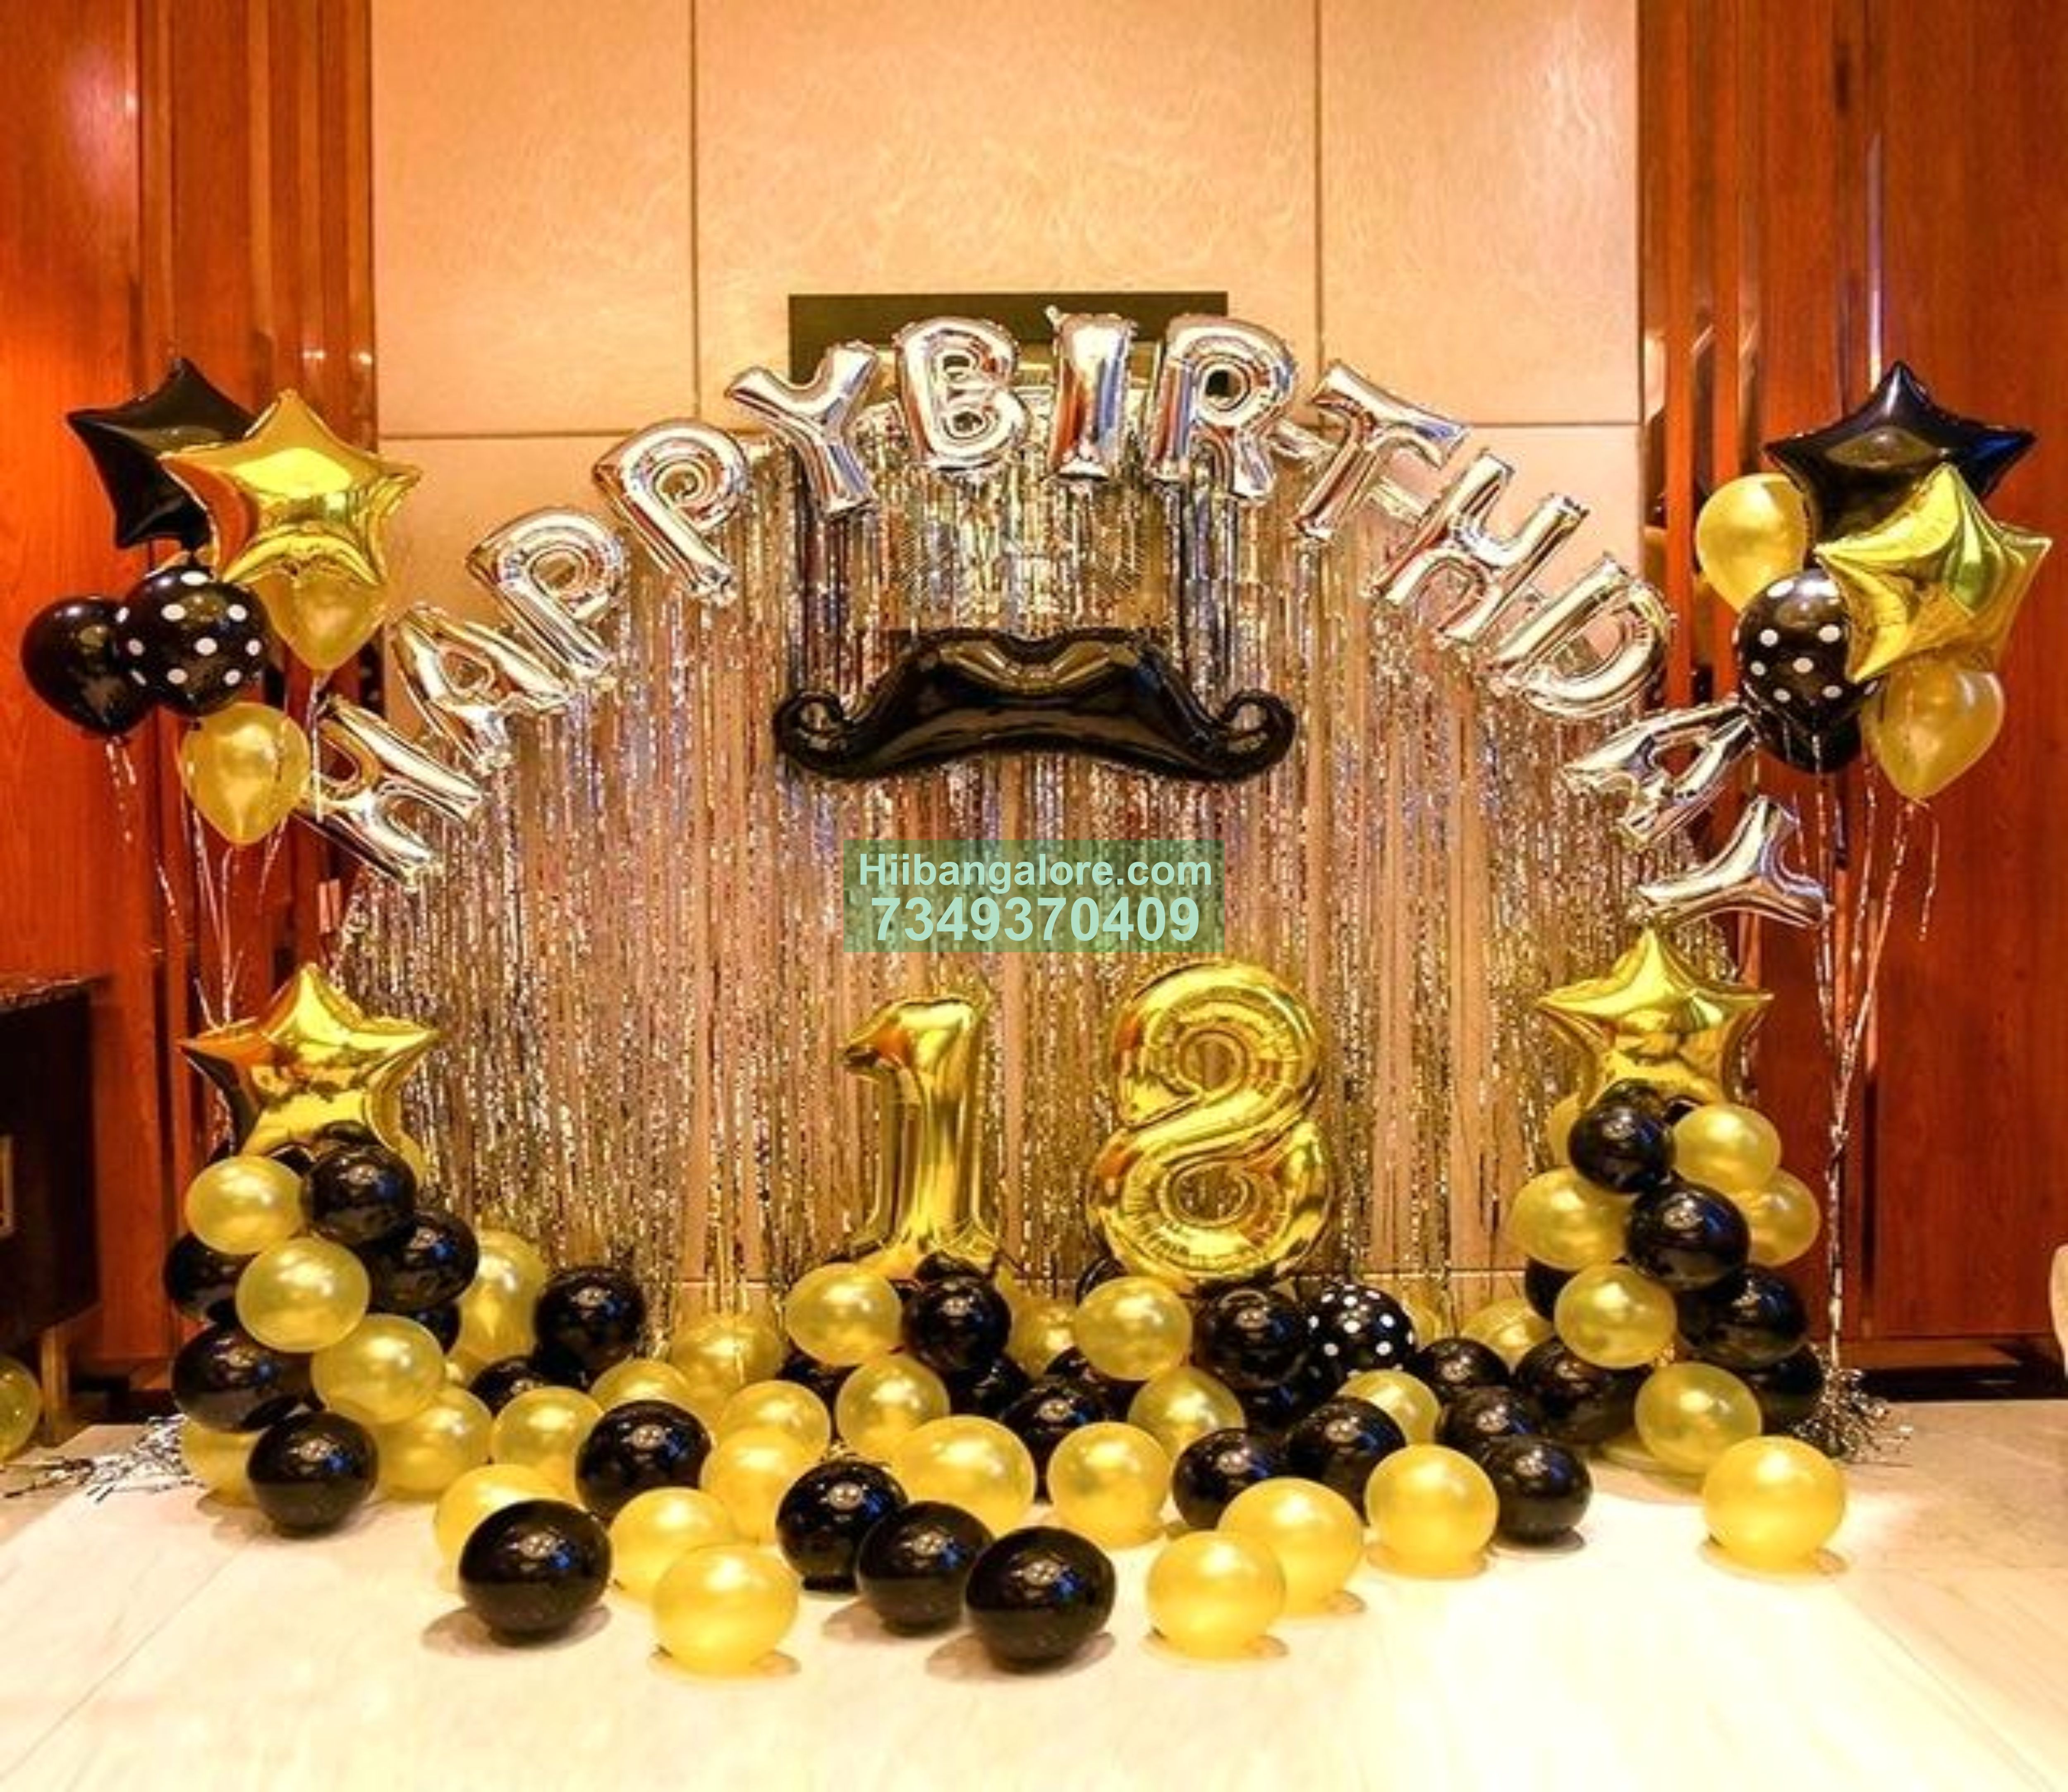 home-balloon-decorations-best-birthday-party-organisers-balloon